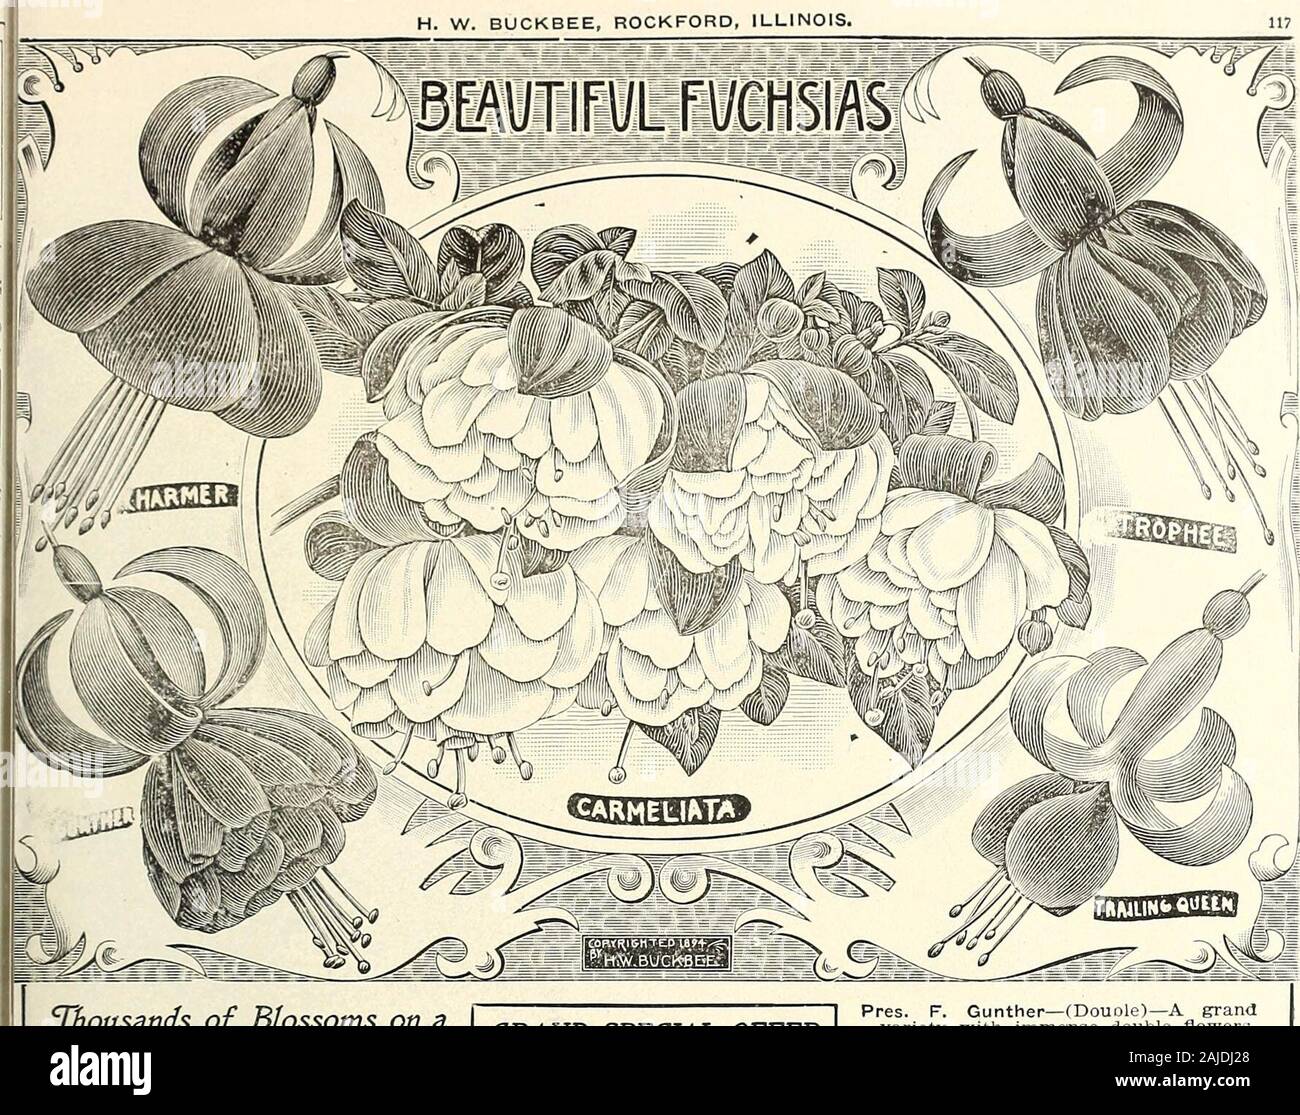 H.W Buckbee seed and plant guide : 1905 . MRS. EL. W. BUCKBEE. Thirty=FouF Years Successful Business. H. W. BUCKBEE, ROCKFORD, ILLINOIS. Thousands of Blossoms on aSingle Plant The Very Bestand Latest Varieties, * . . Charmer—(Single)—The grandest of allwinter bloomers. Tube and sepalswaxy carmine. Its clusters of long,drooping, tube-like, brilliant flowers,and veTy large, green foliage give it amost striking and beautiful appear-ance. Five thousand flowers have beencounted upon a single plant. Worth15c; my price 10c. Trophee—(Double)—Violet blue corolla;very dark rich red sepals, waxy lustre1. Stock Photo